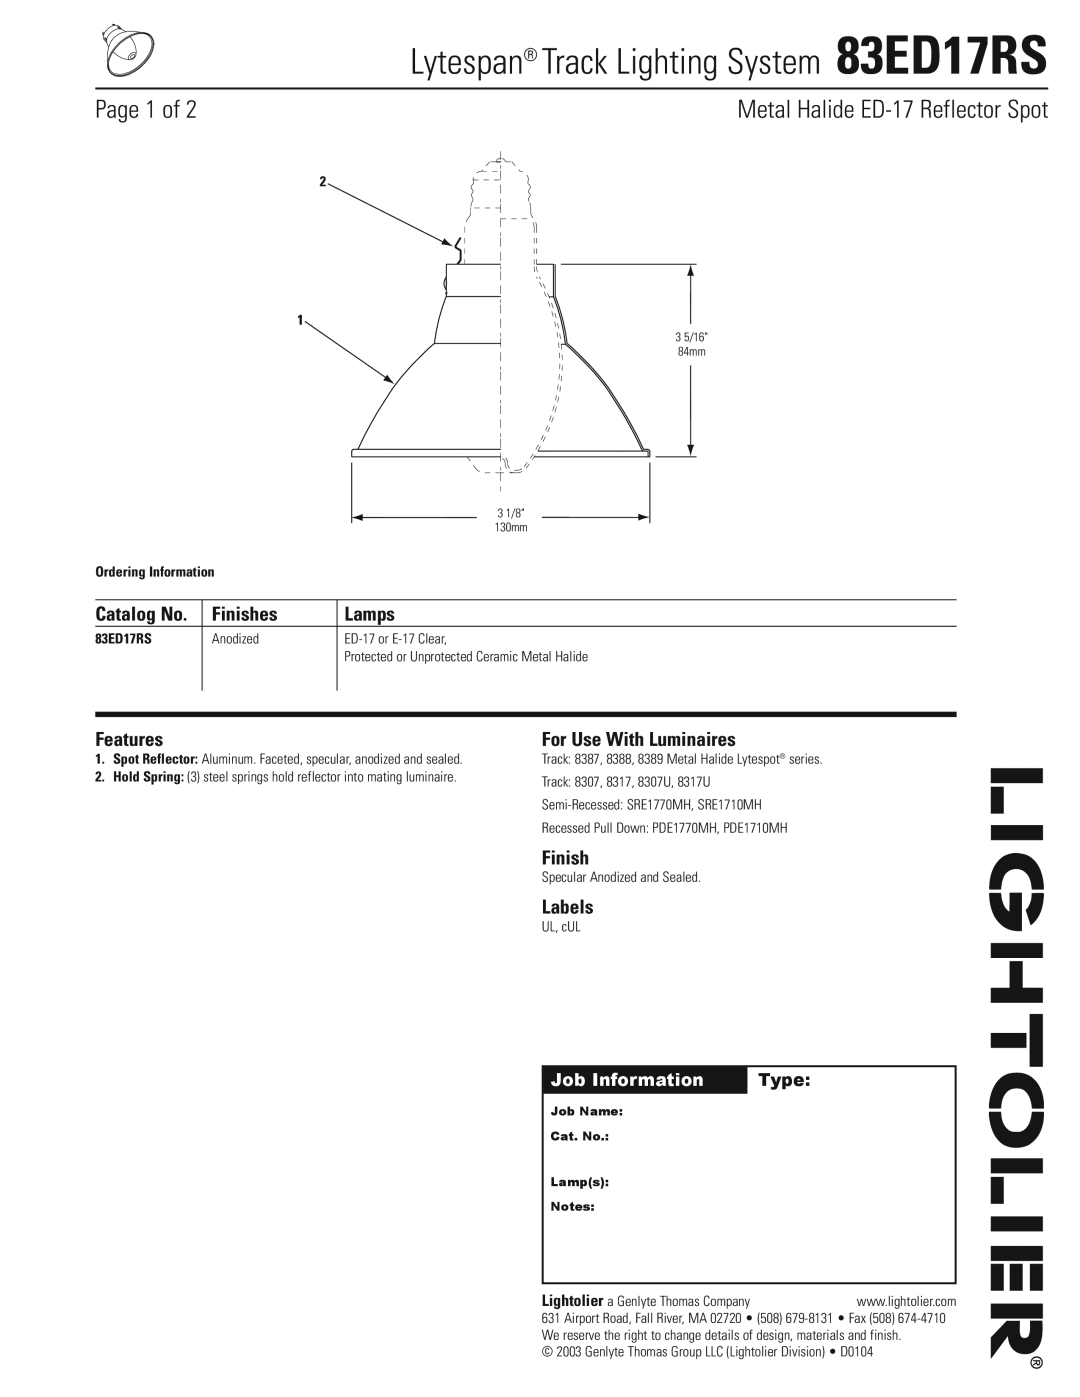 Lightolier 83ED17RS manual Finishes, Lamps, Features, For Use With Luminaires, Labels, Job Information, Type, Page 1 of 